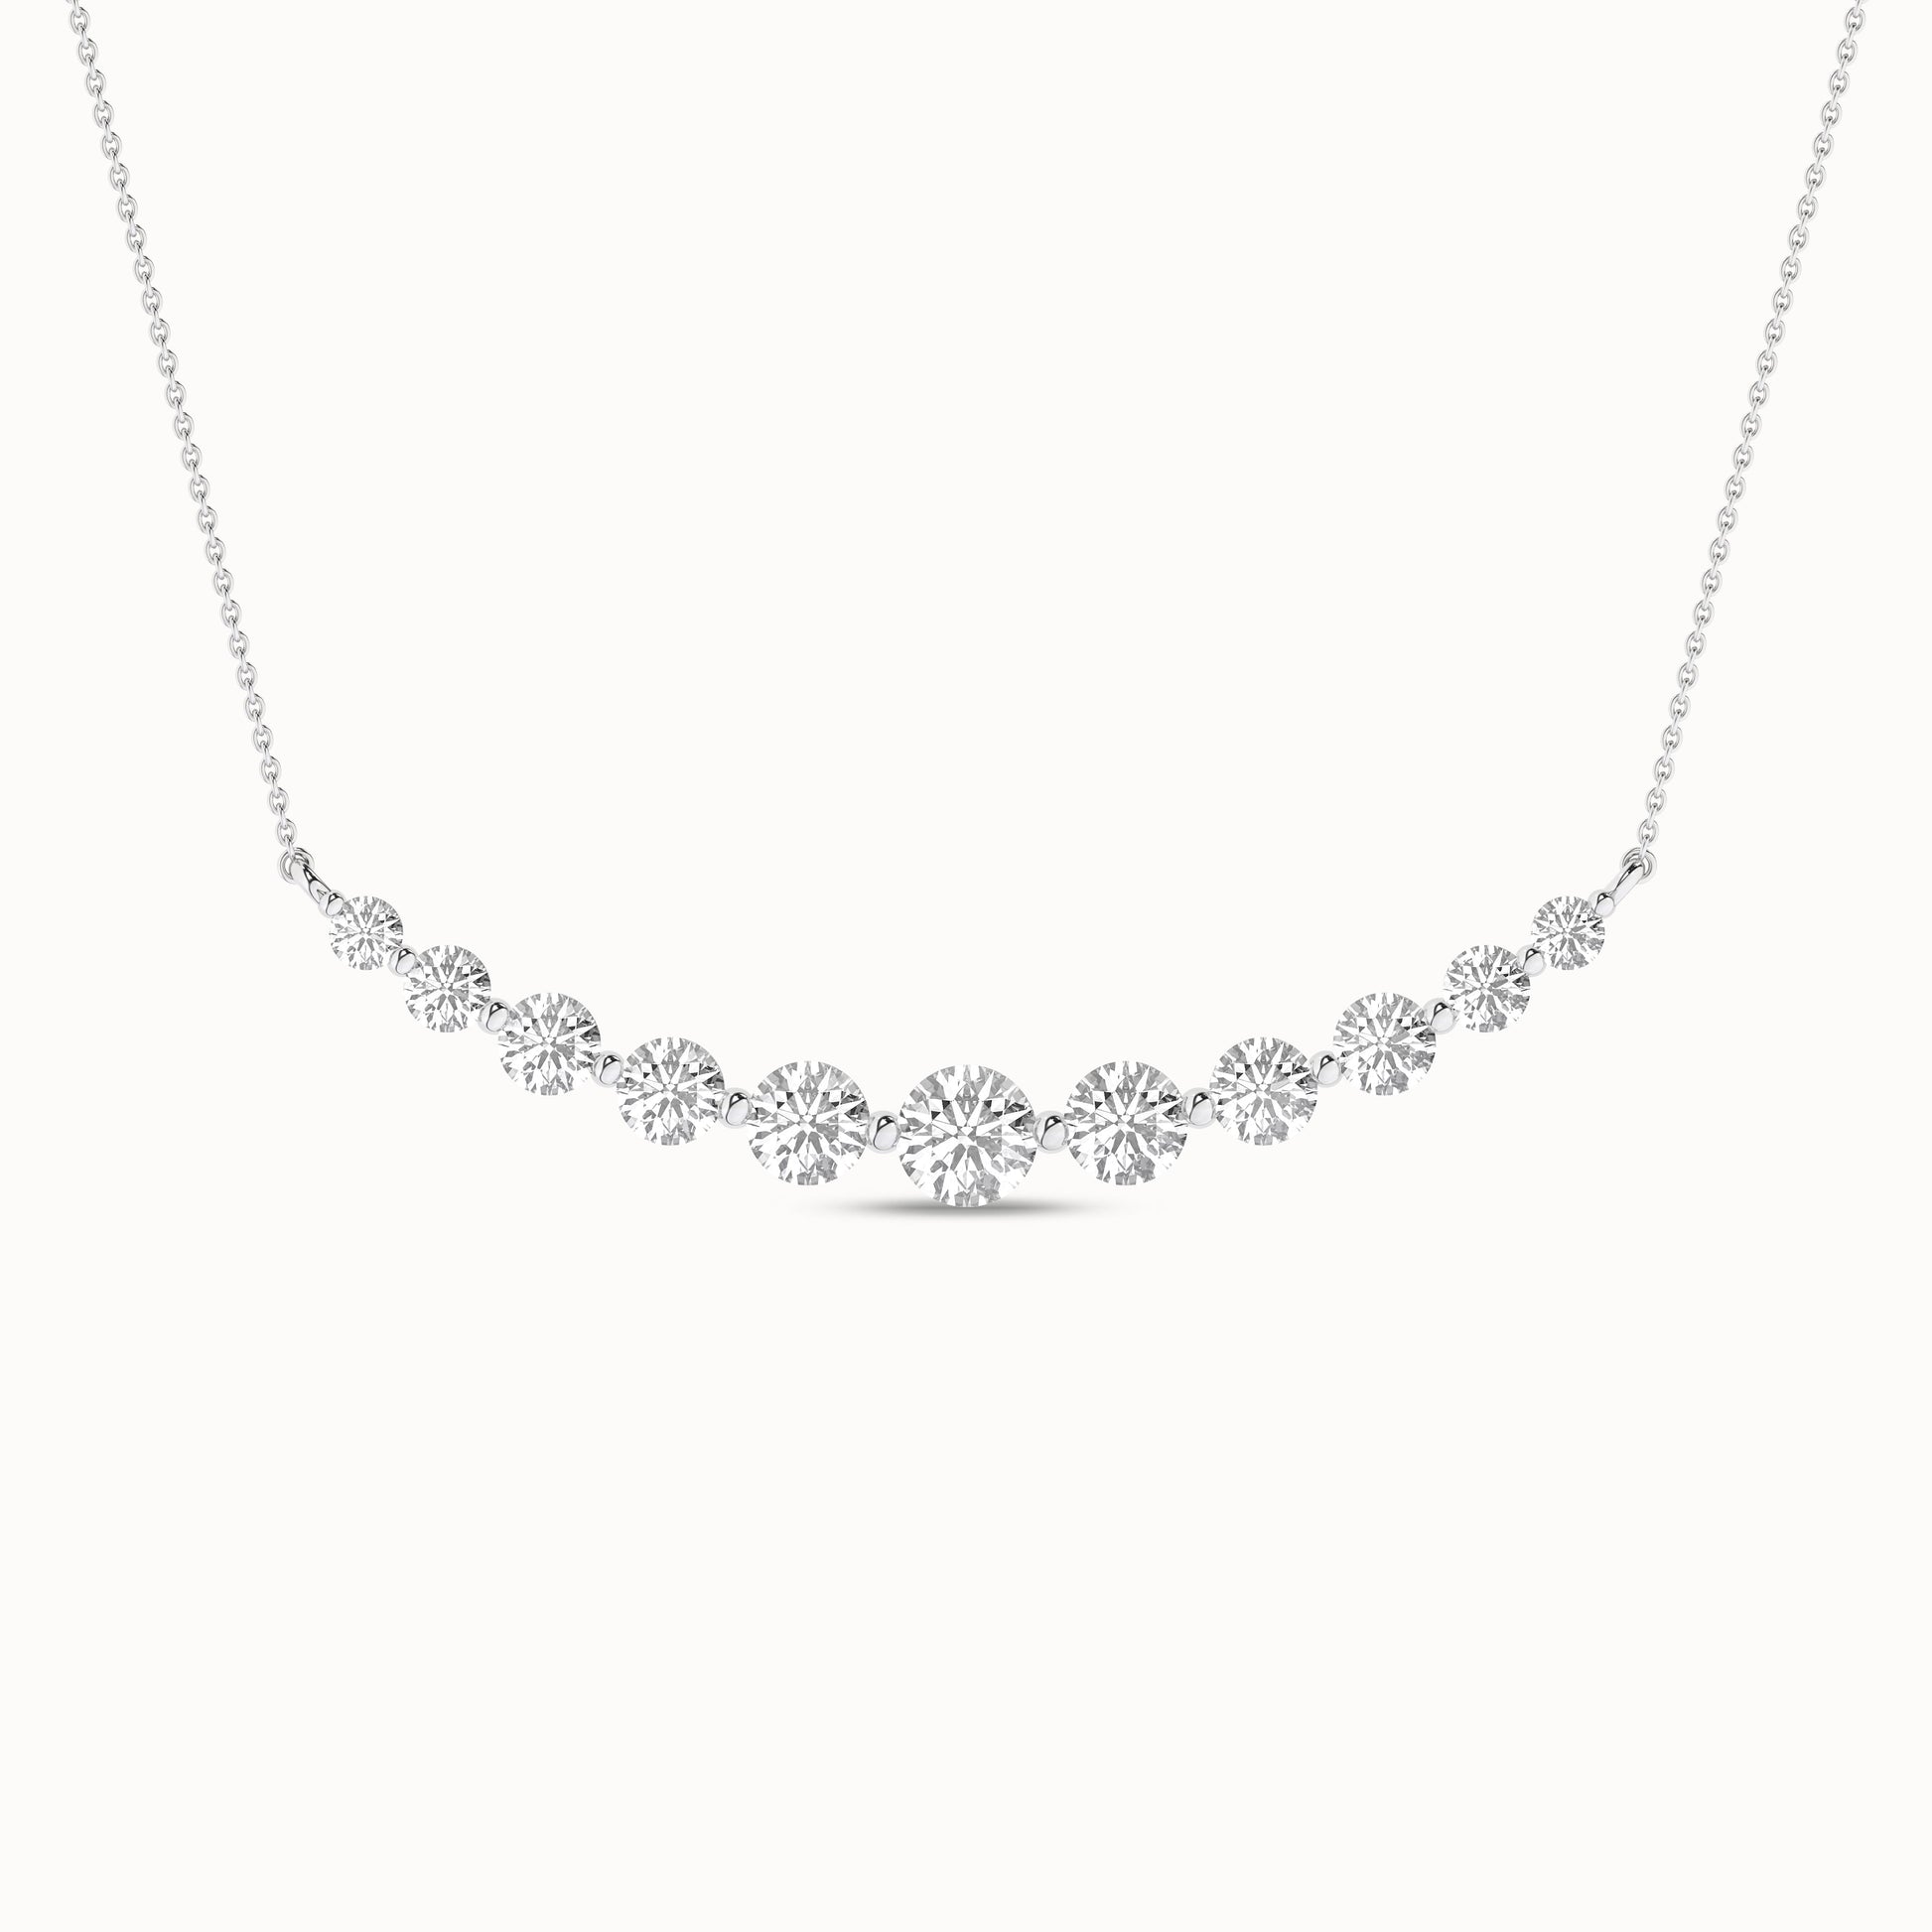 Captivating Necklace_Product Angle_1 1/2Ct. - 2